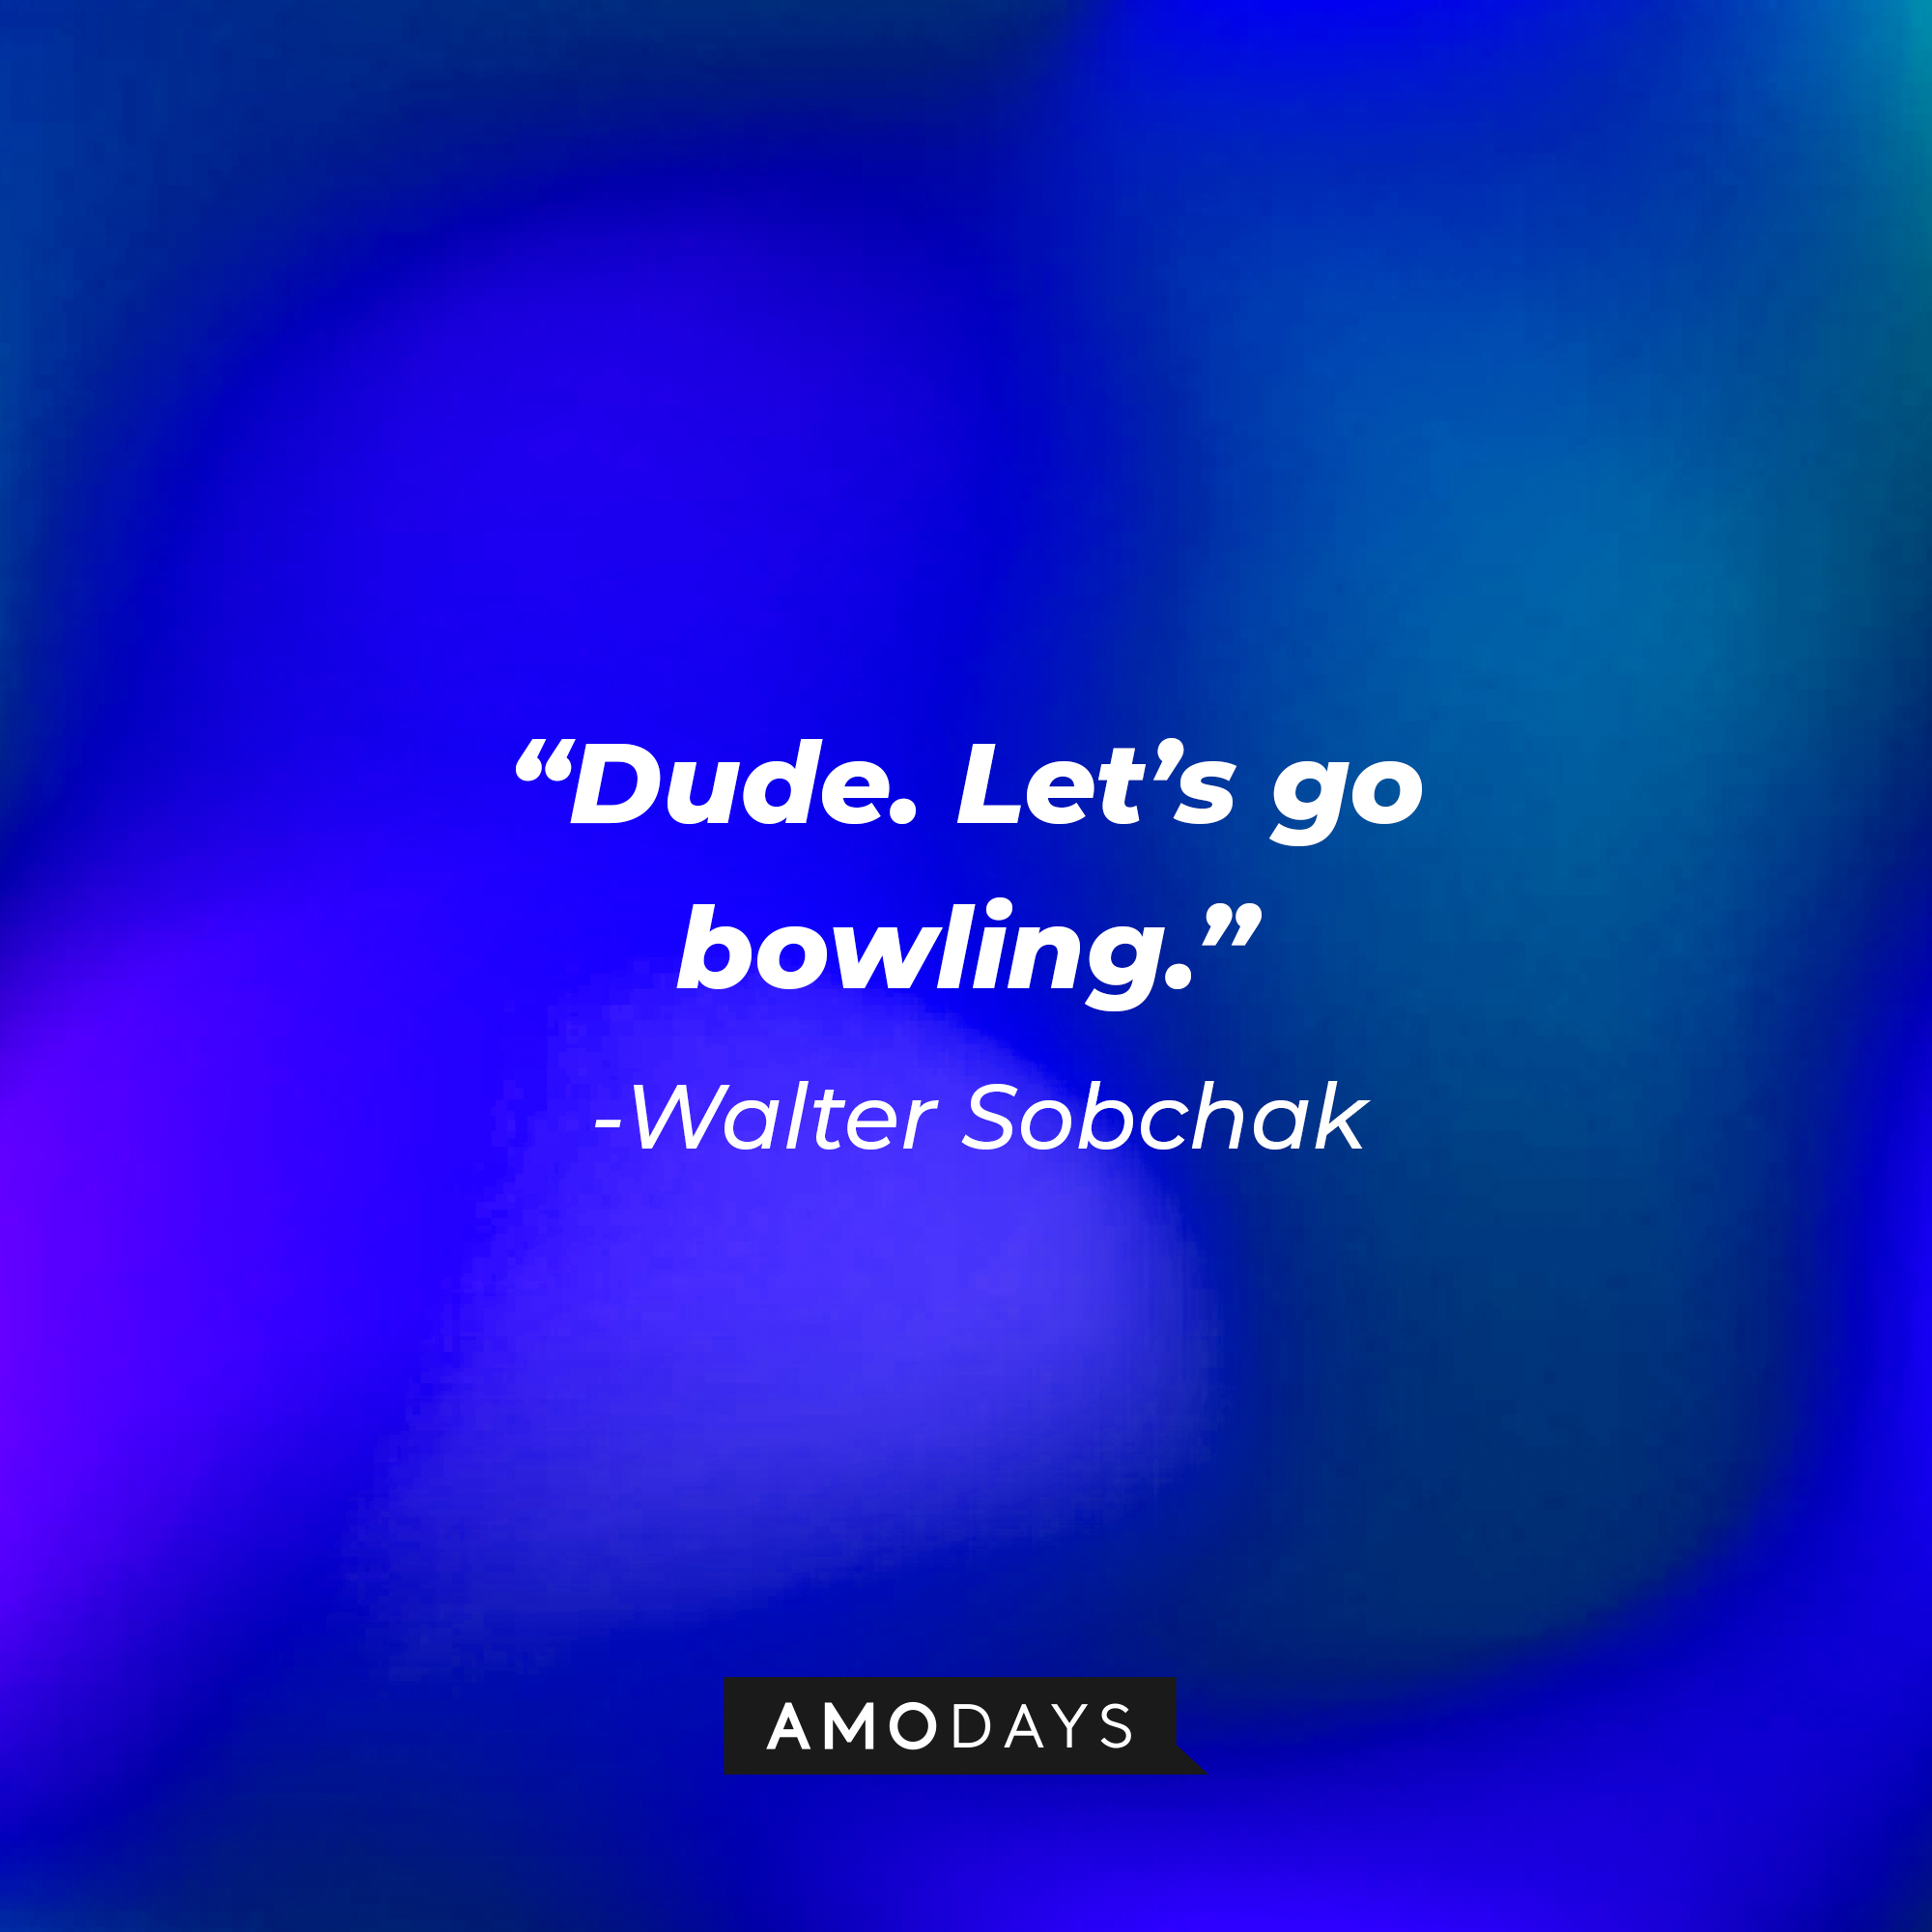 Walter Sobchak’s quote: “Dude. Let’s go bowling.” | Source: AmoDays